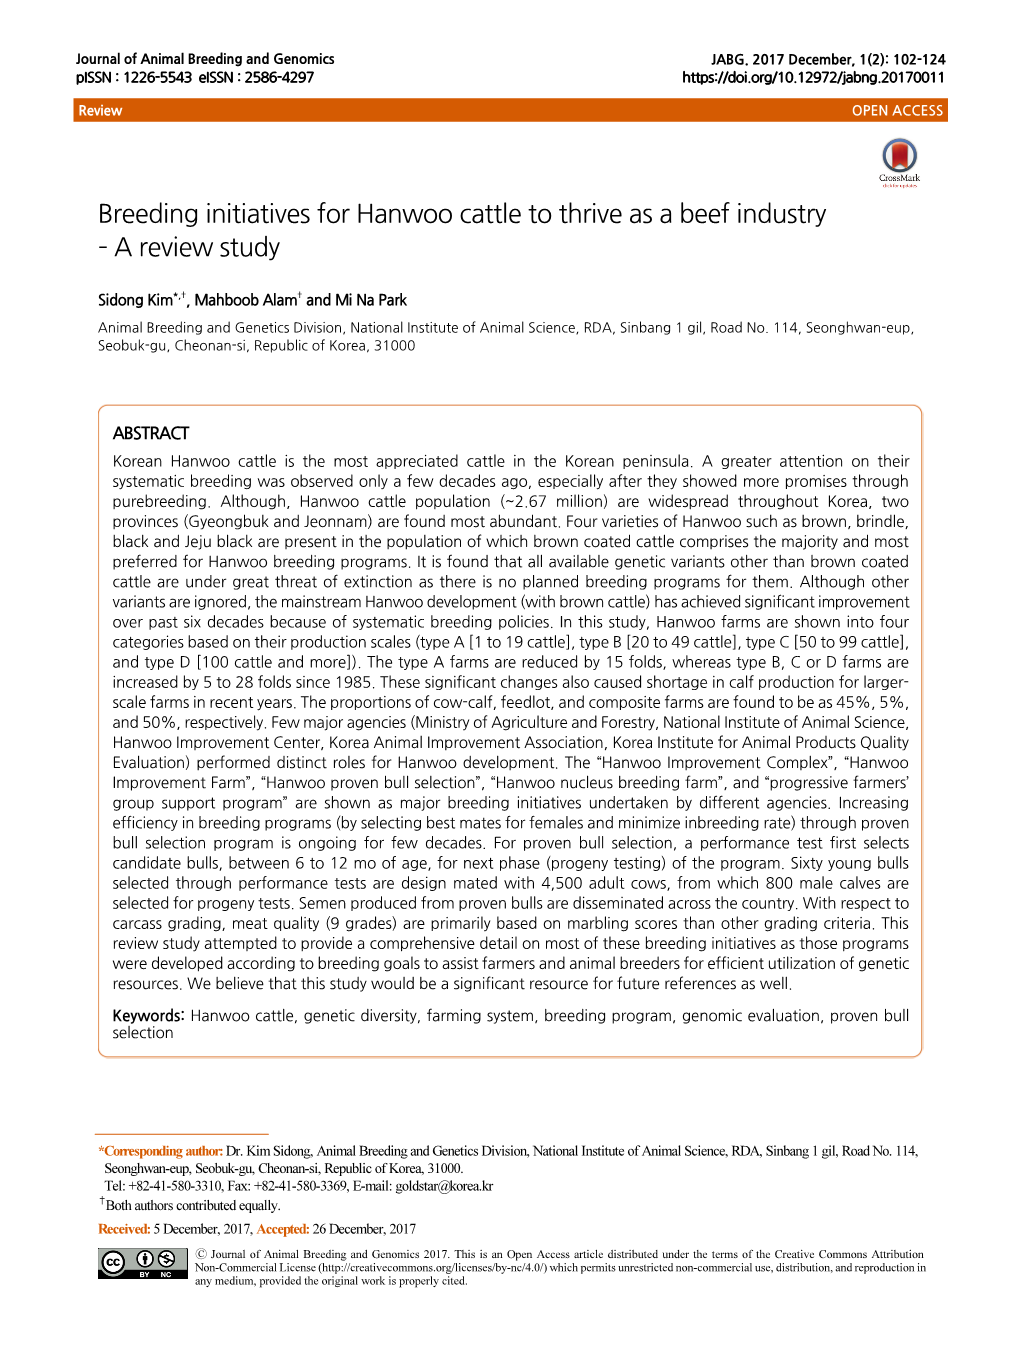 Breeding Initiatives for Hanwoo Cattle to Thrive As a Beef Industry – a Review Study